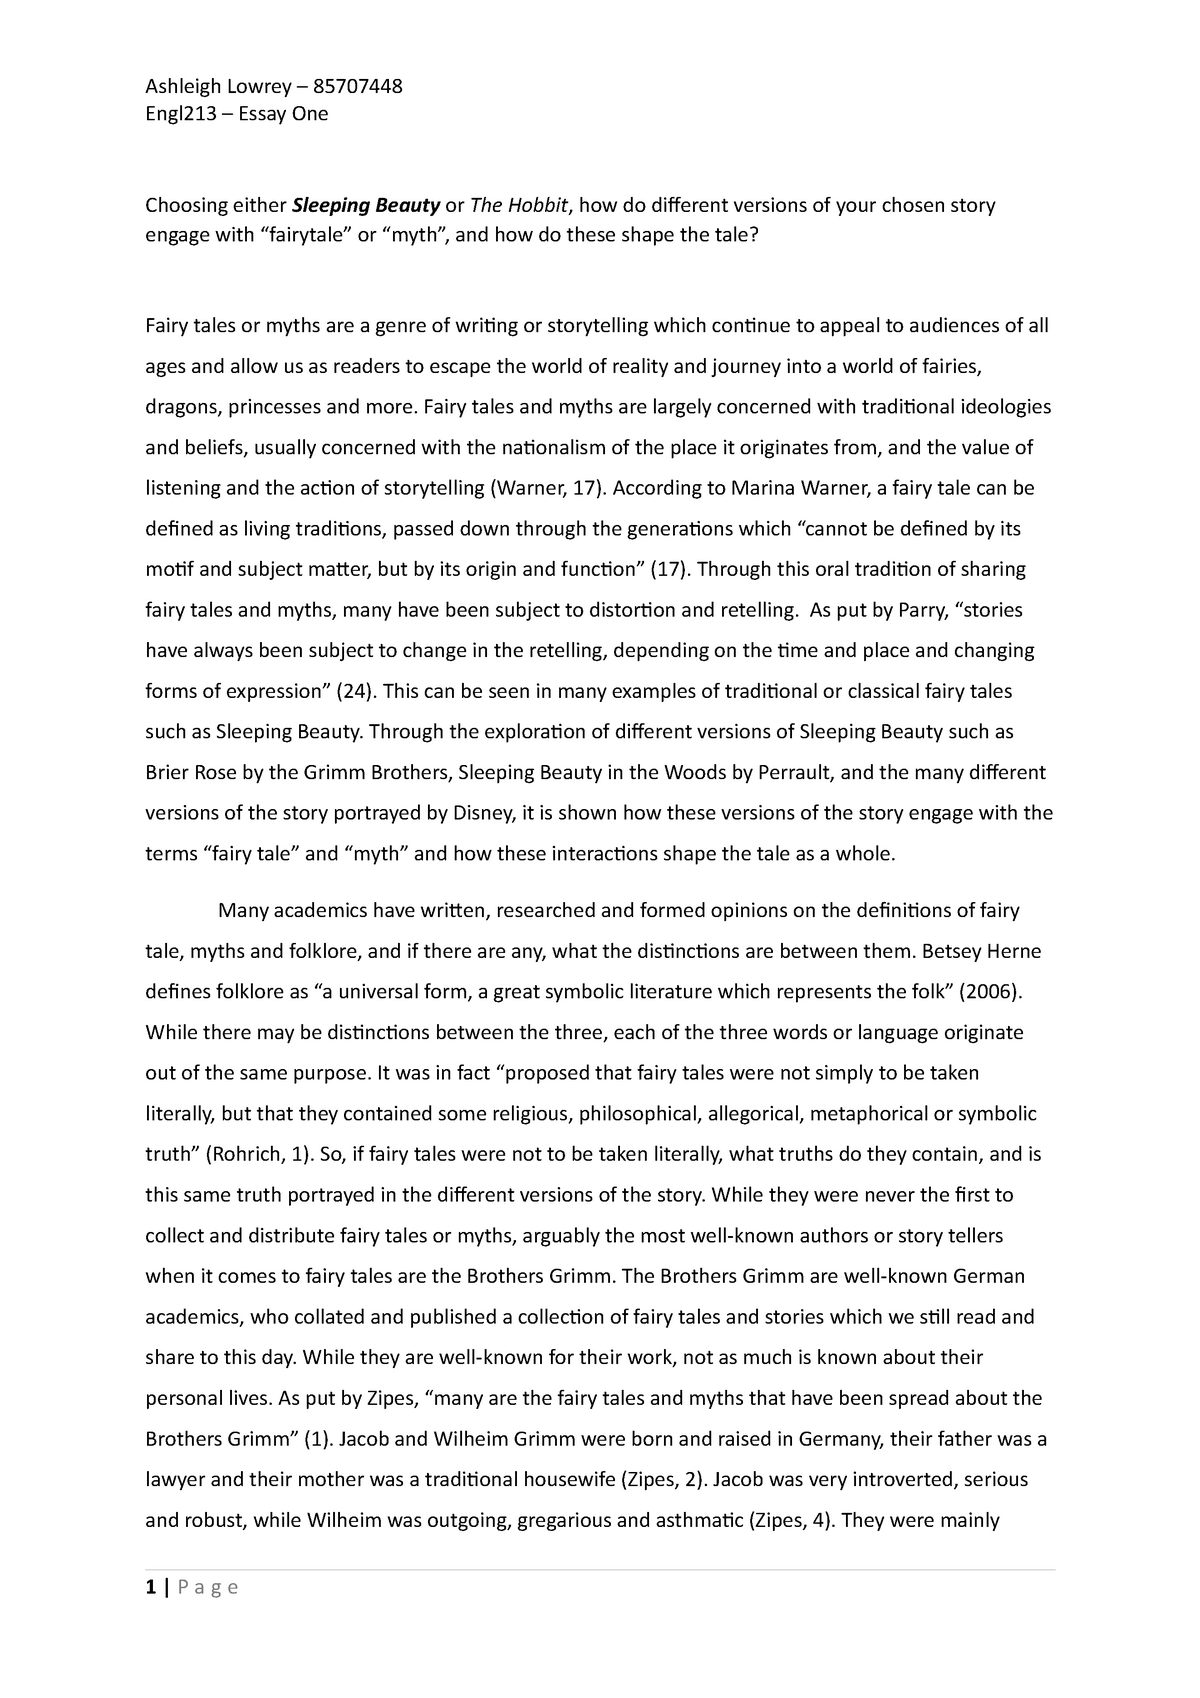 essay about sleeping beauty